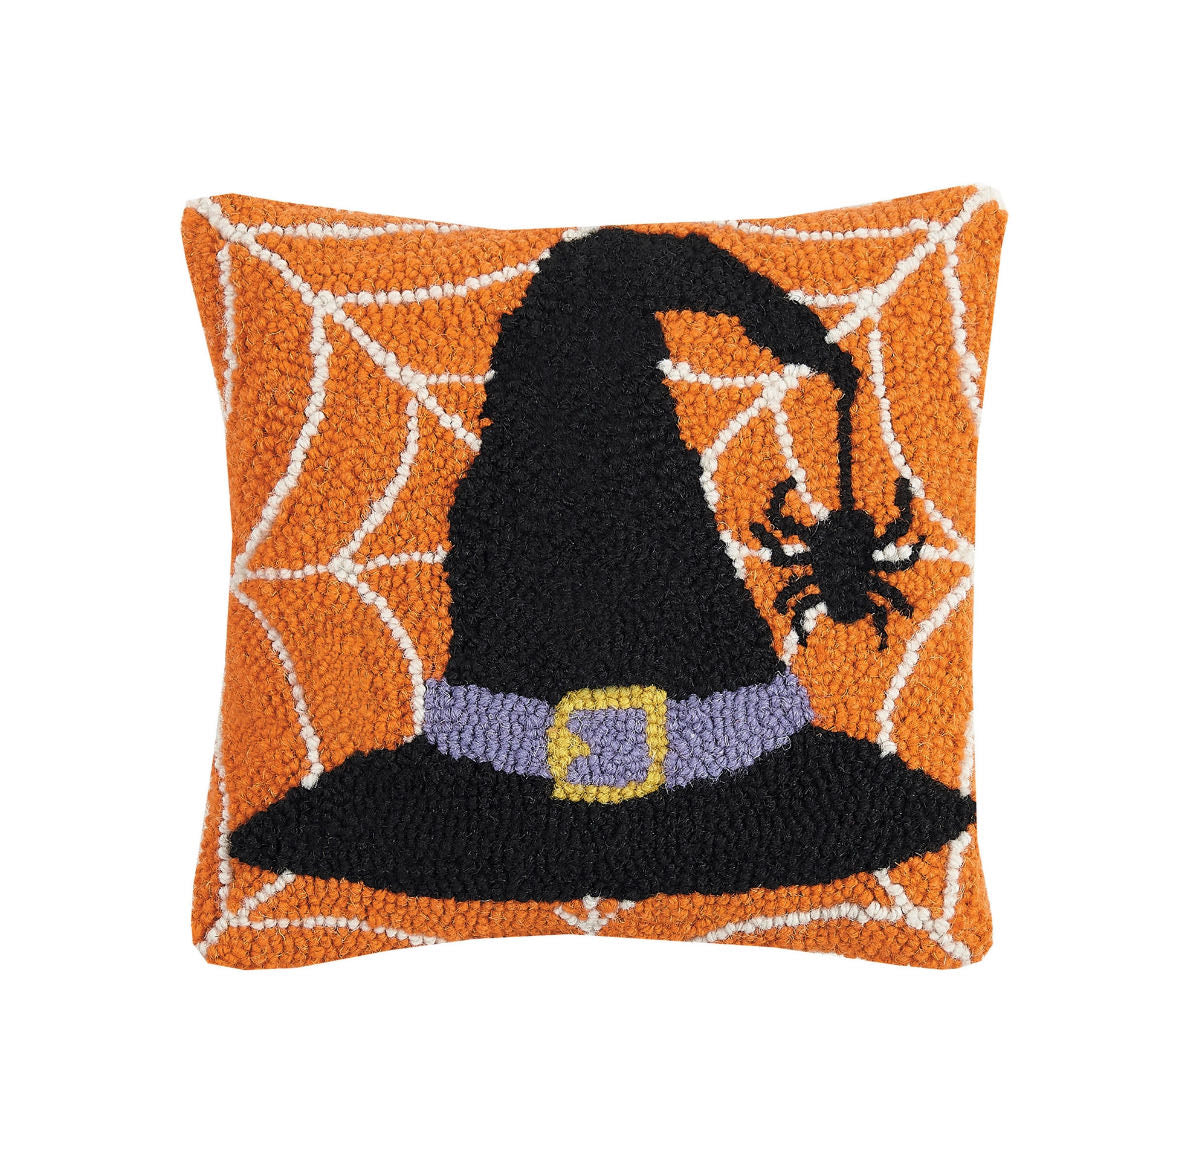 Festive Halloween Witches’ Hat Hooked Rug Pillow - A